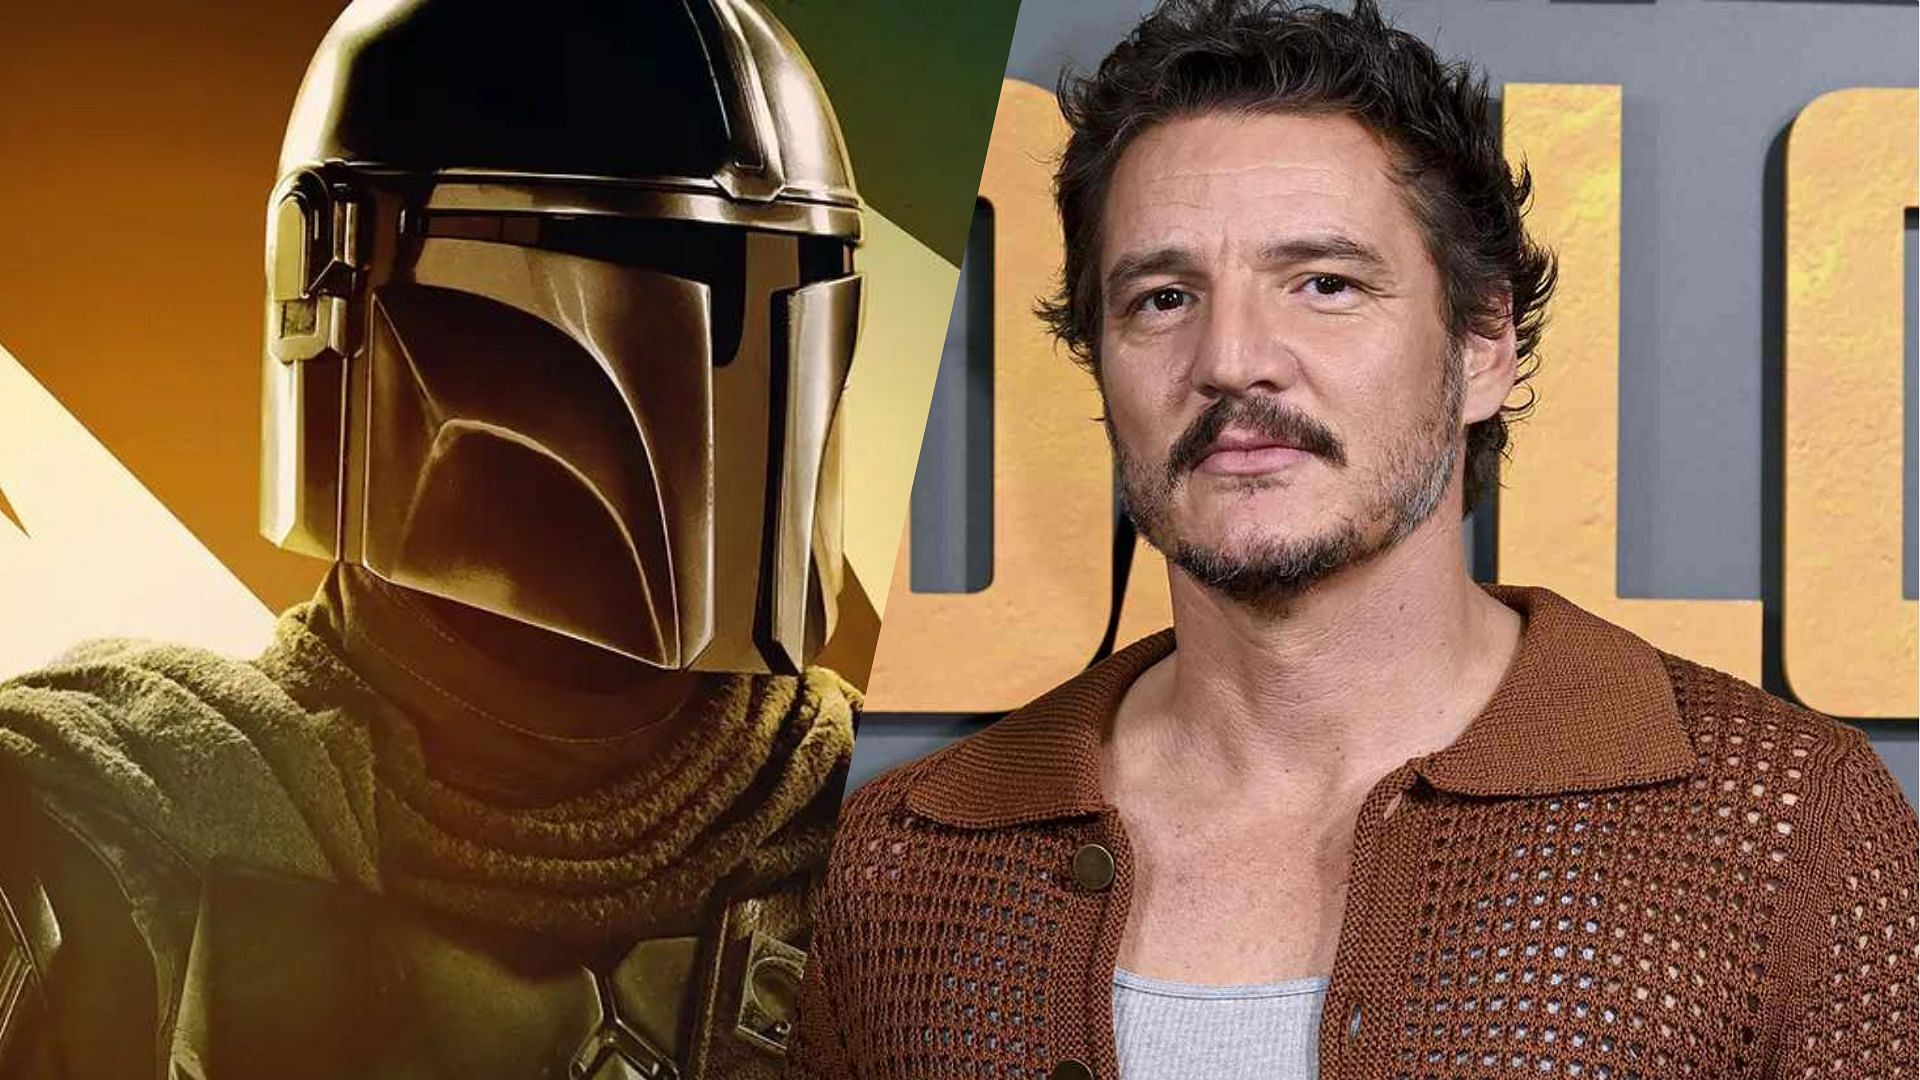 Pedro Pascal says that his work as Din Djarin is mostly voice work with limited physical portrayal (Images via Lucasfilm/Getty)